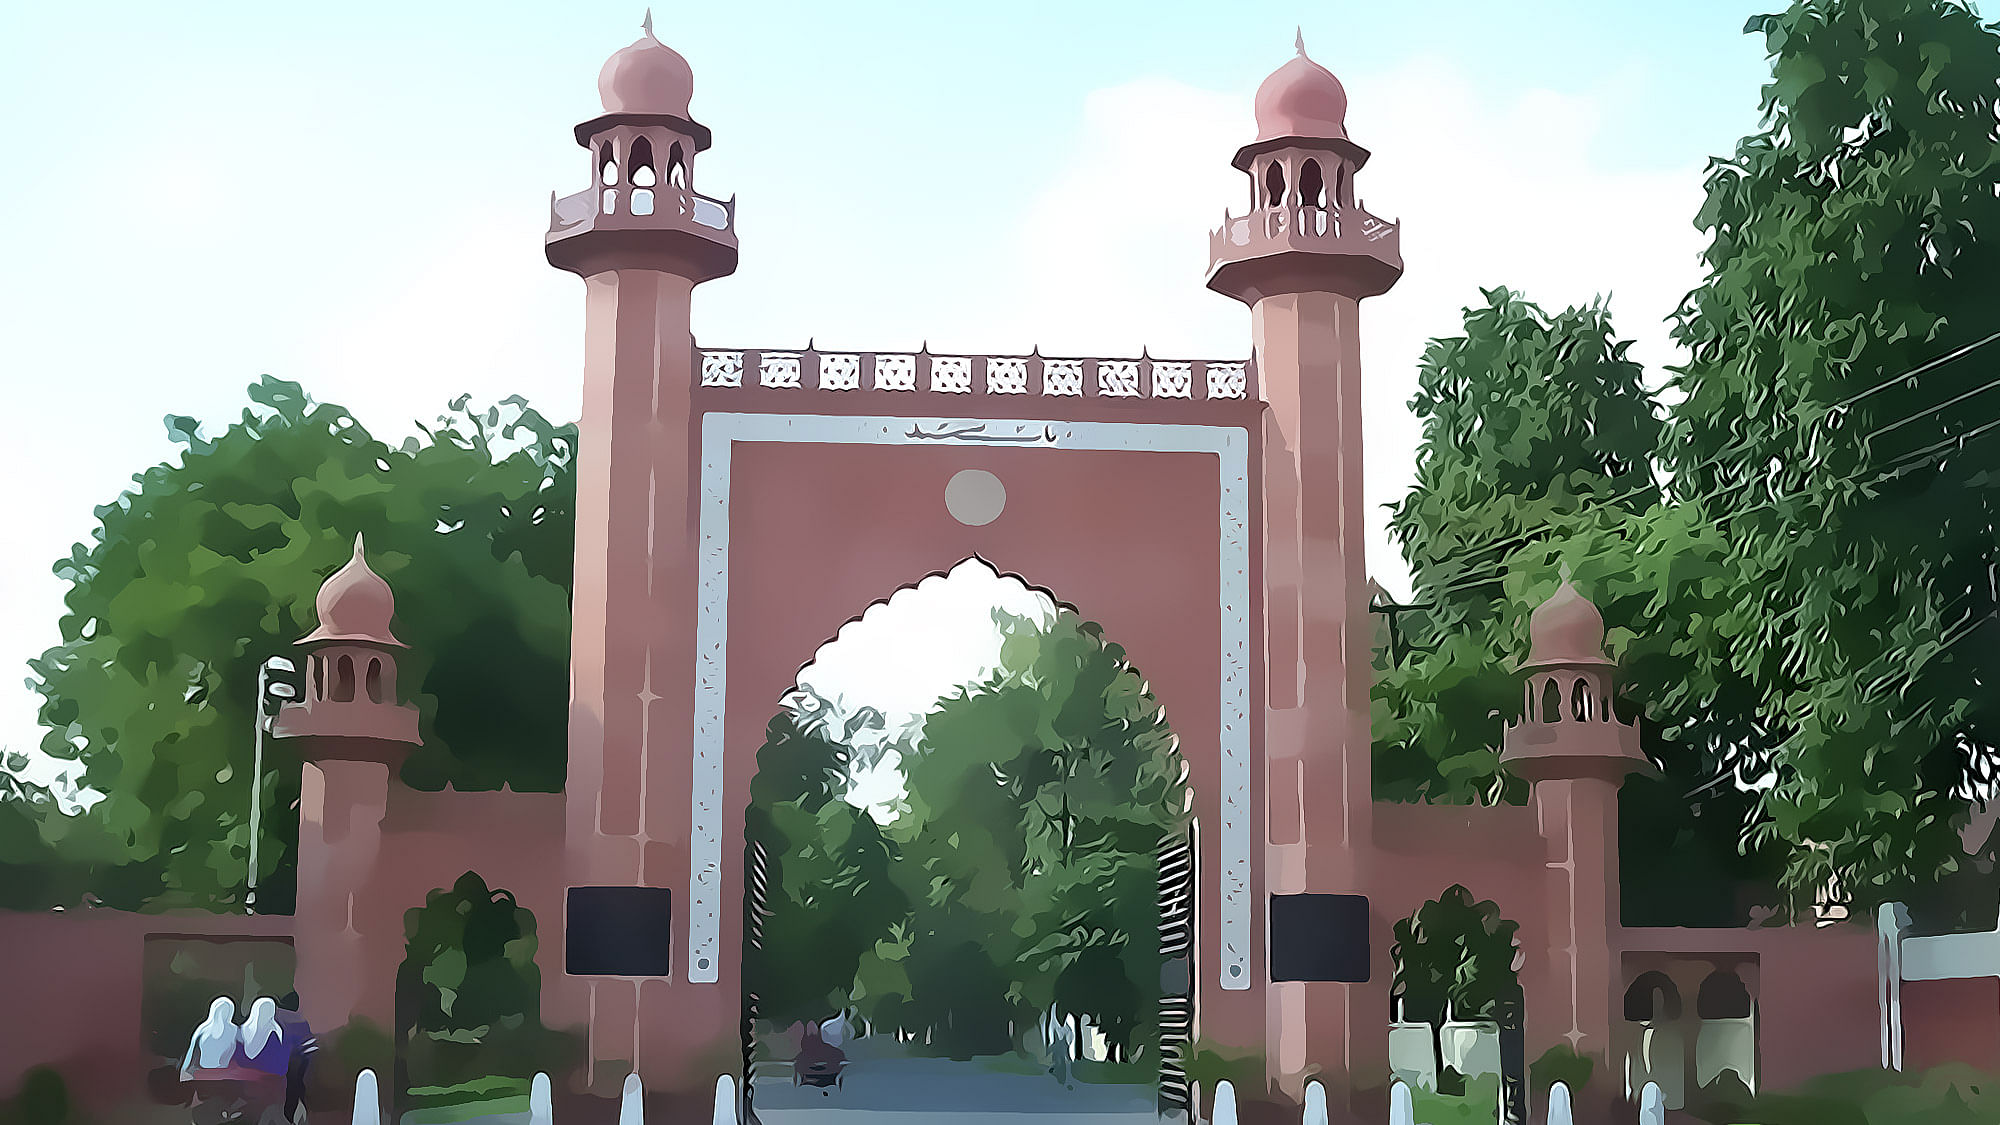 AMU has been embroiled in political controversy lately. (Photo: <b>The Quint</b>)